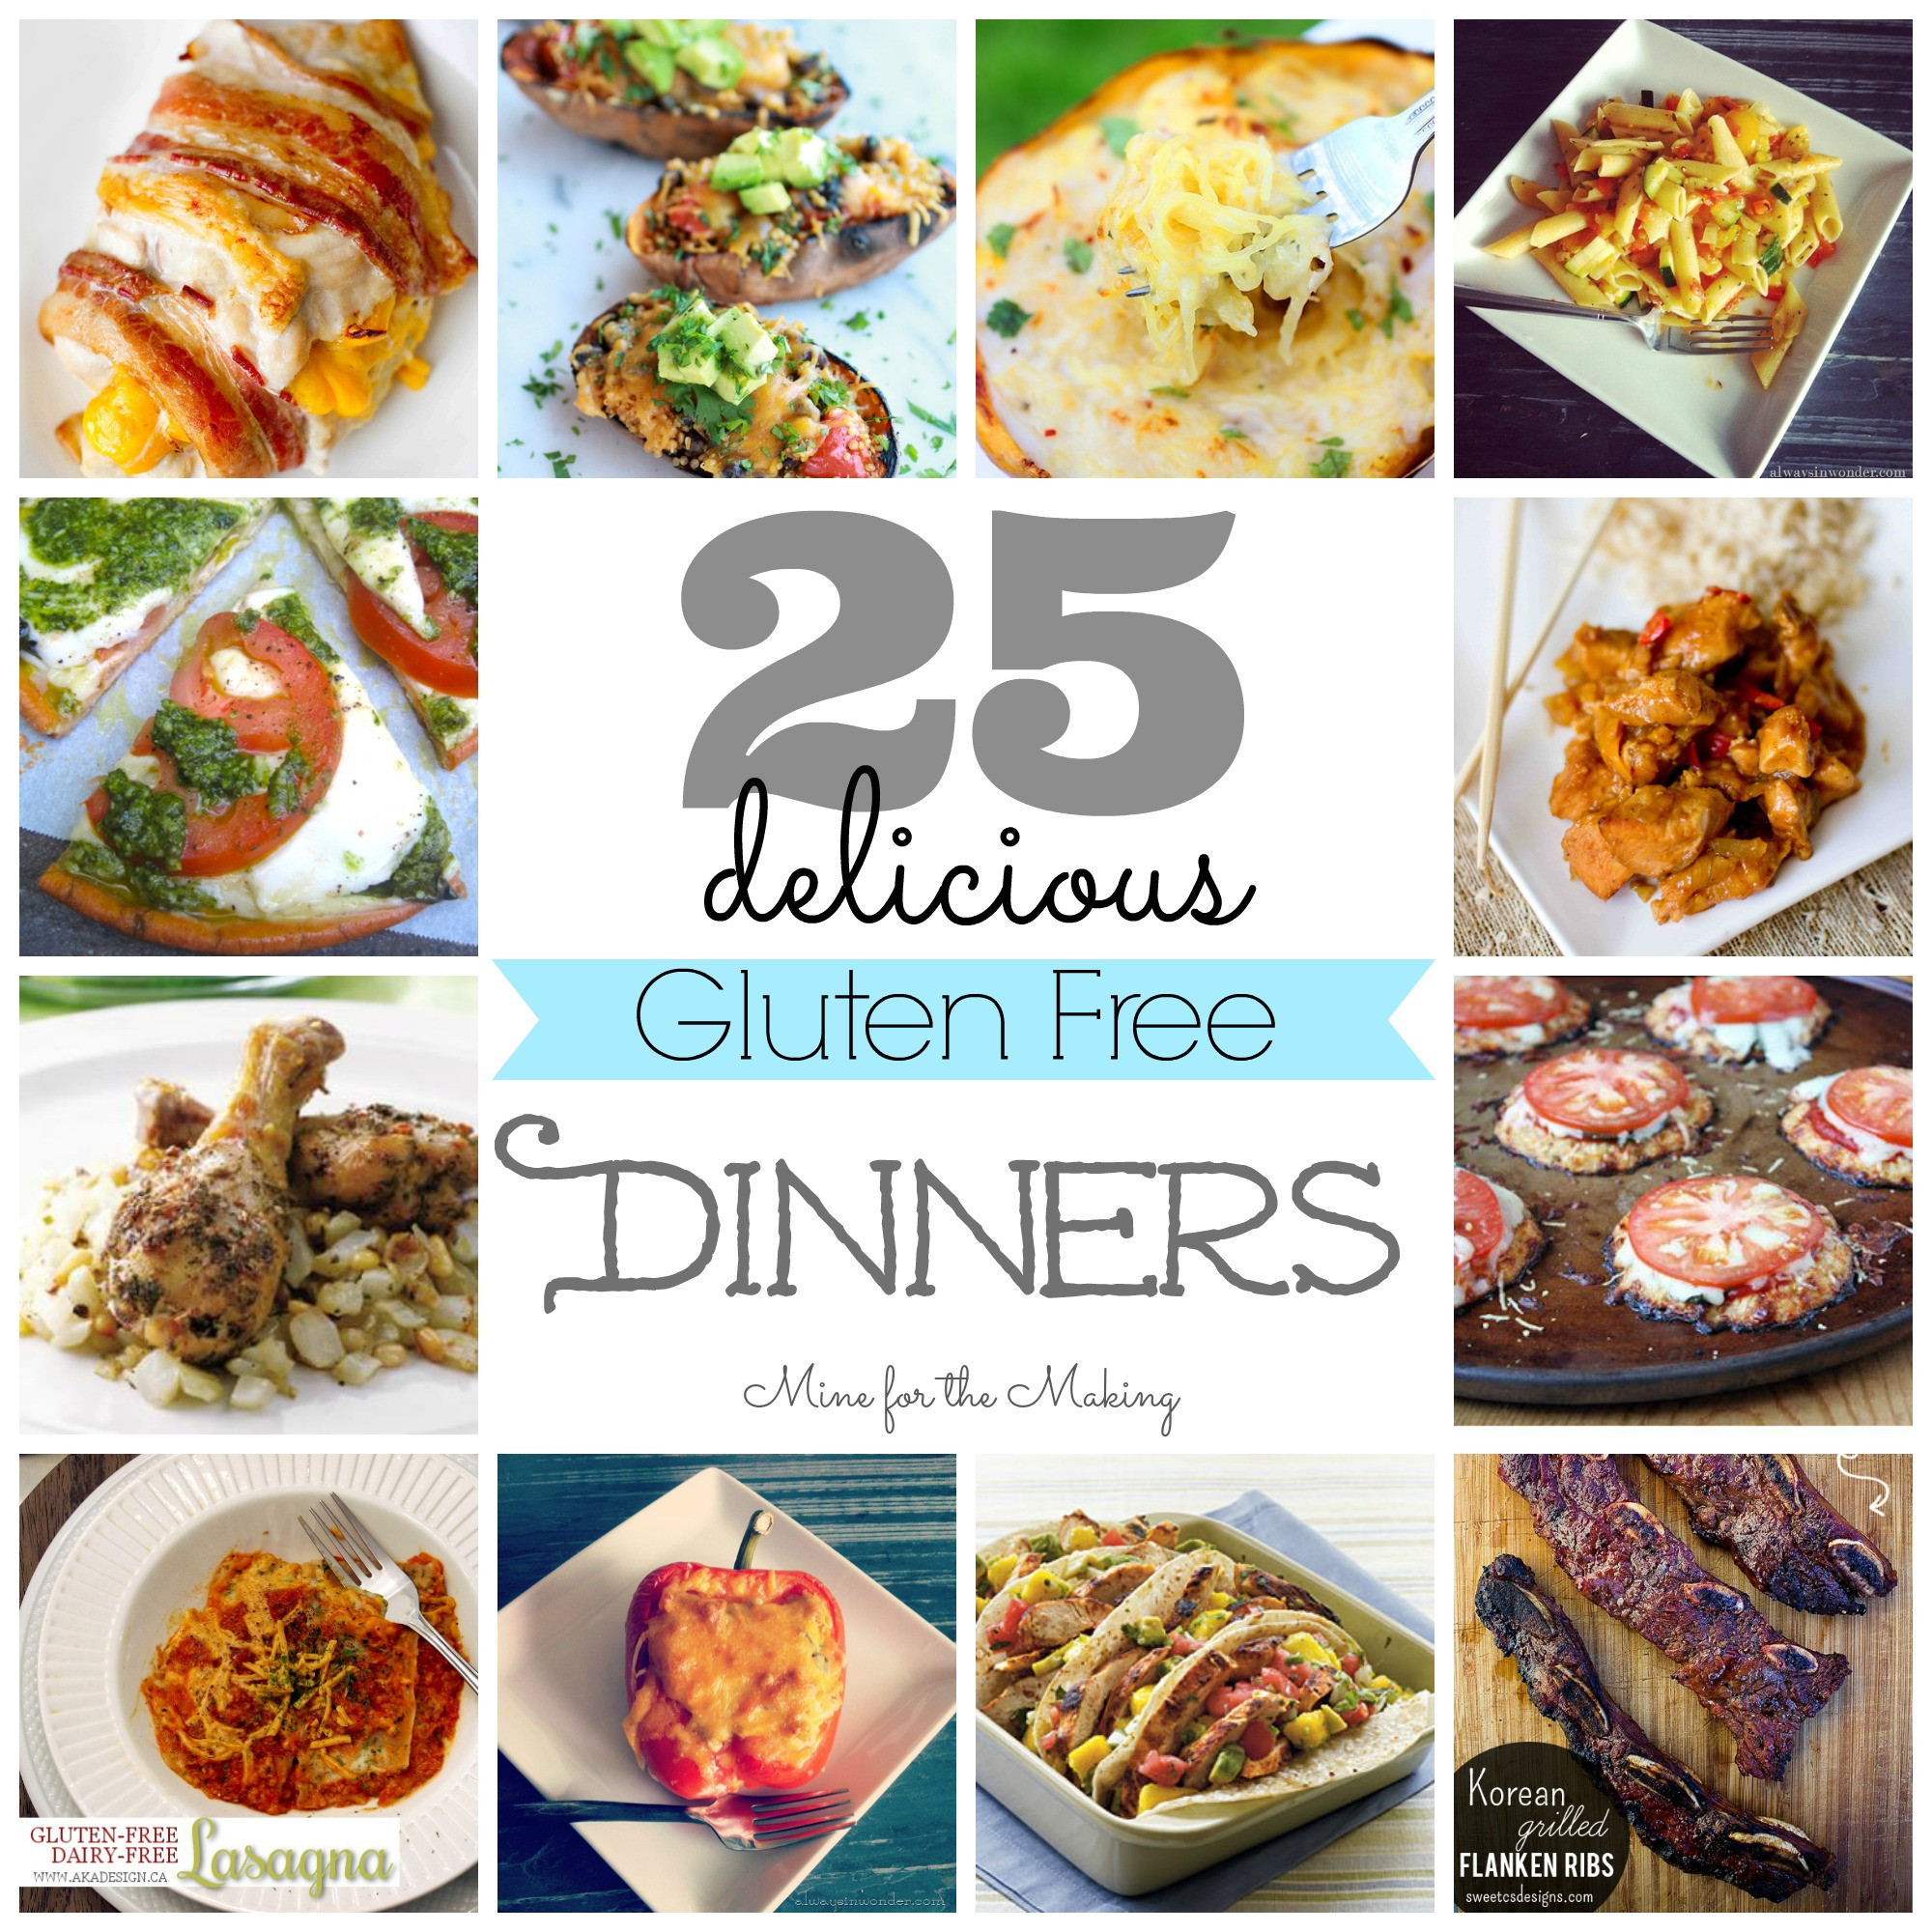 Gluten Free Dinners
 Food a licious Friday 25 Delicious Gluten Free Dinners